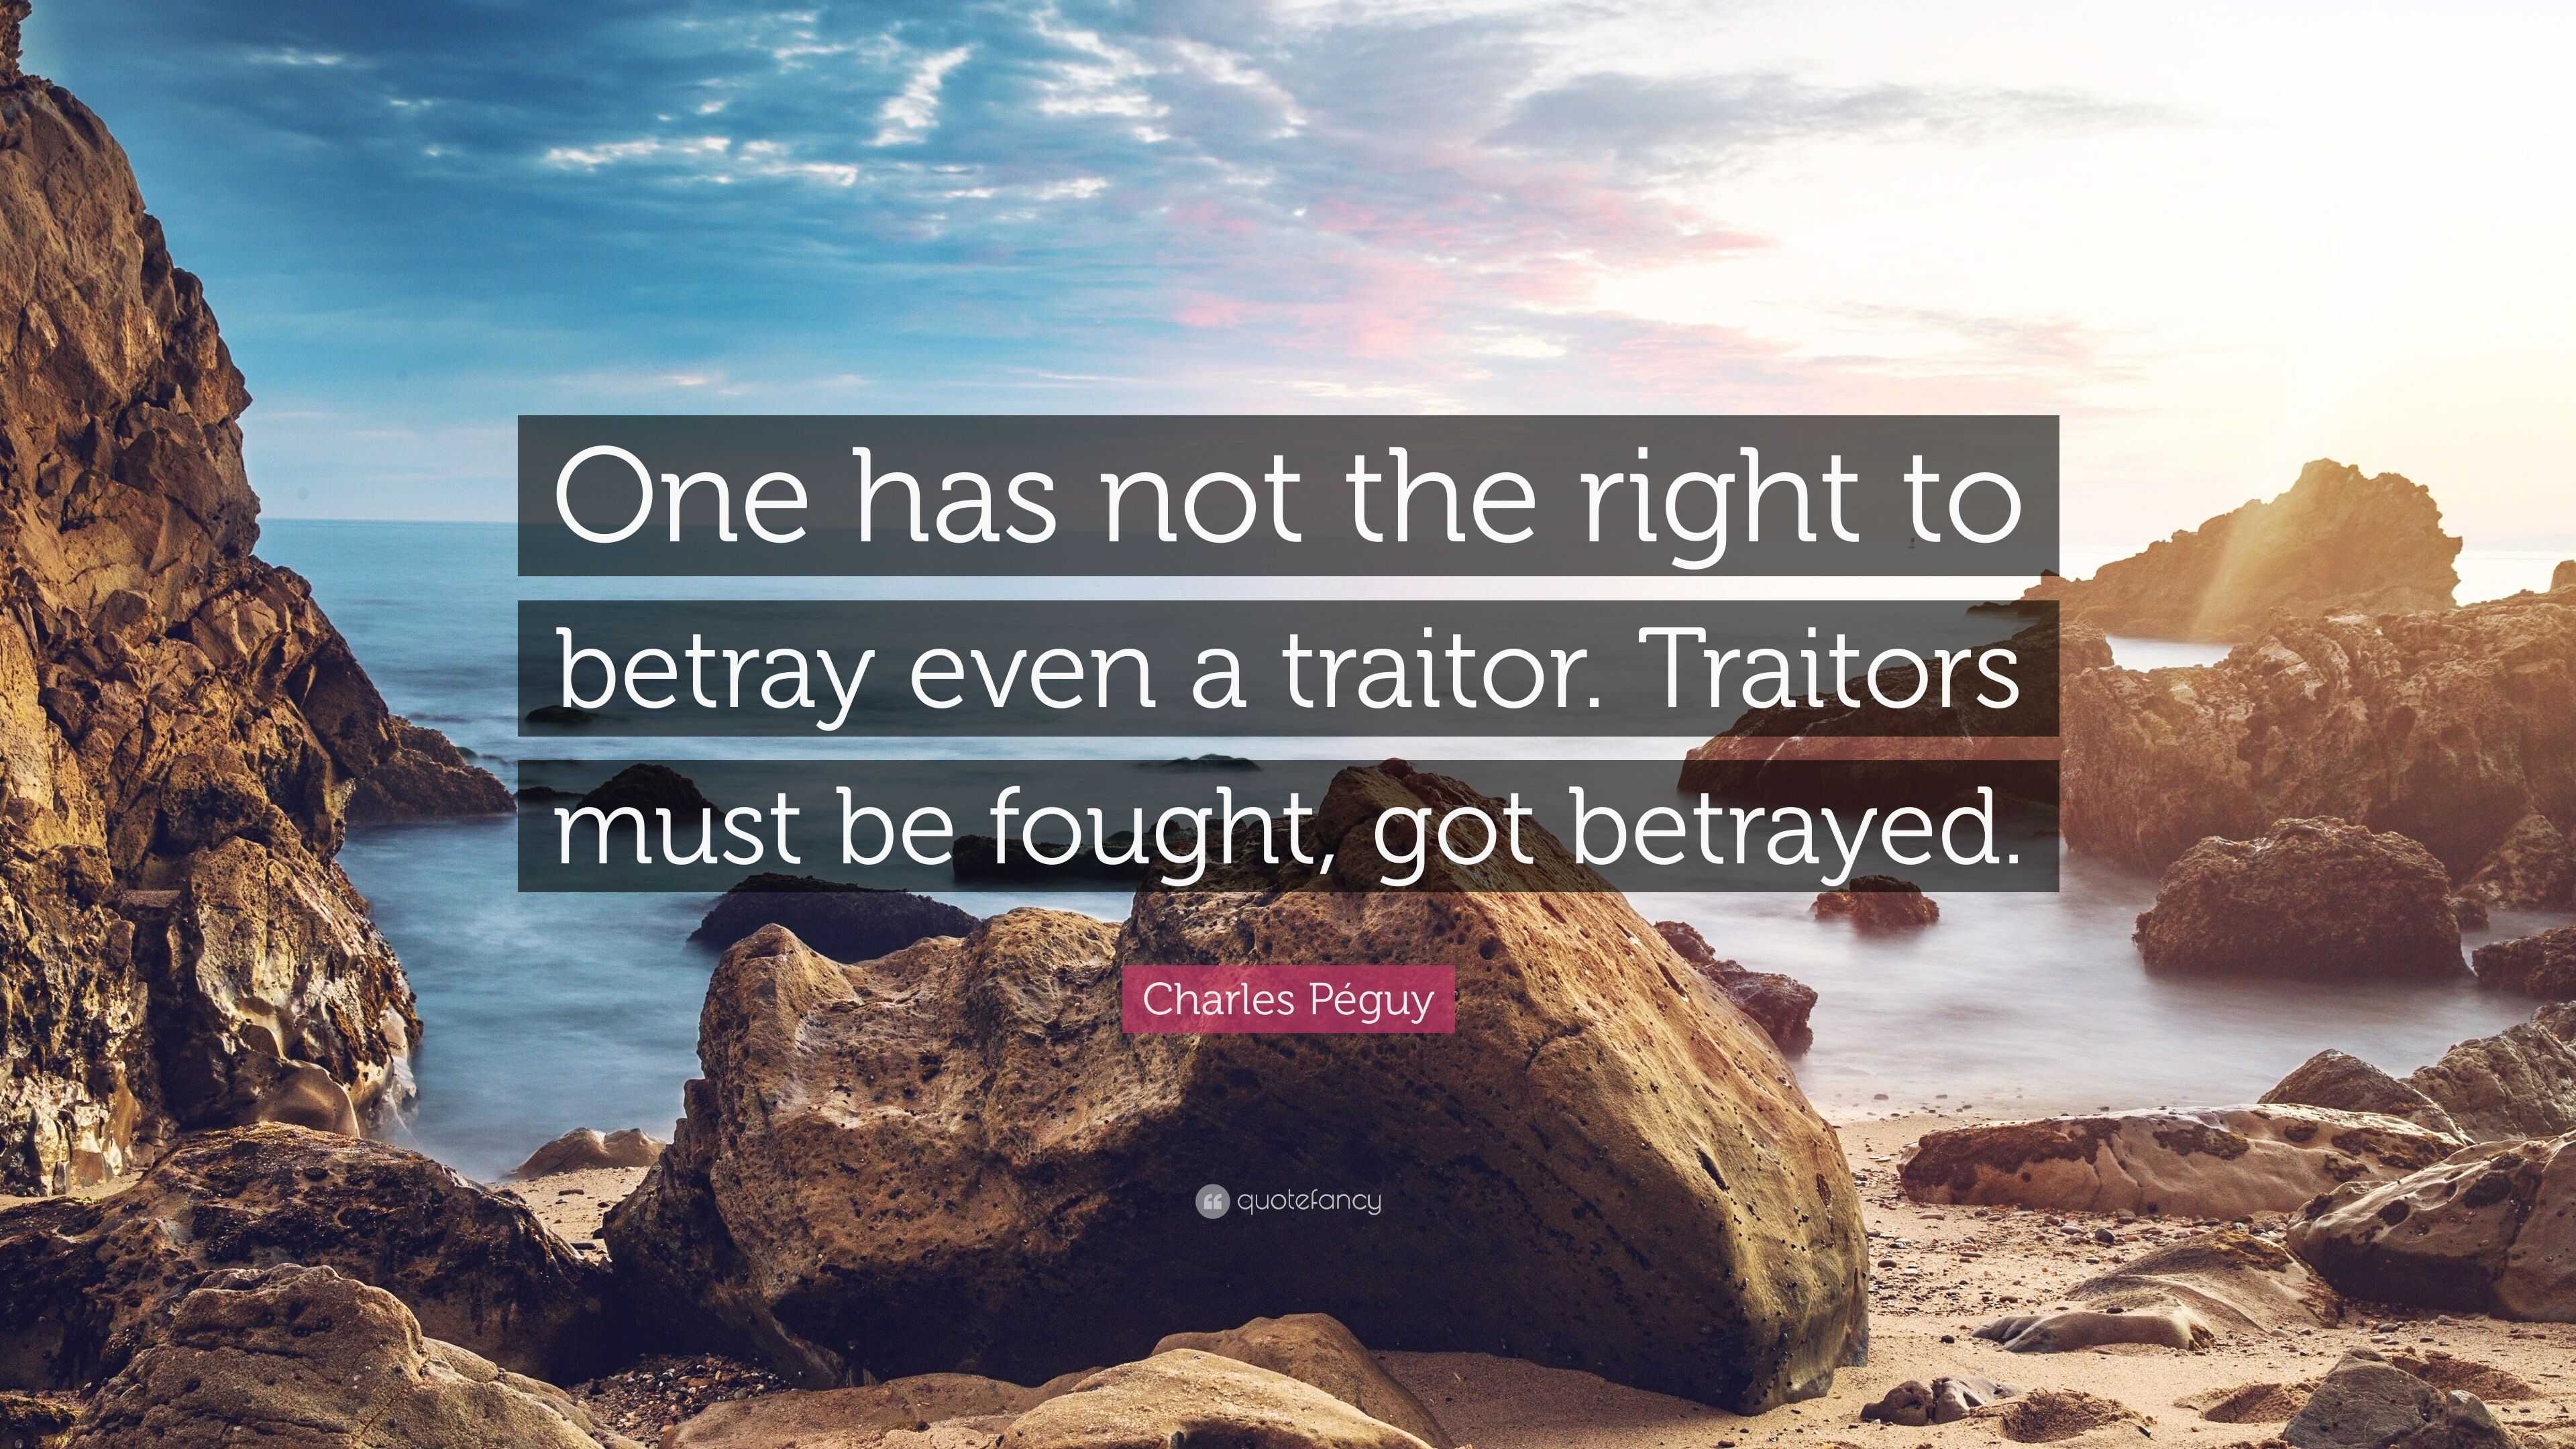 Once a Traitor Always a Traitor Quotes - Motivation and Love